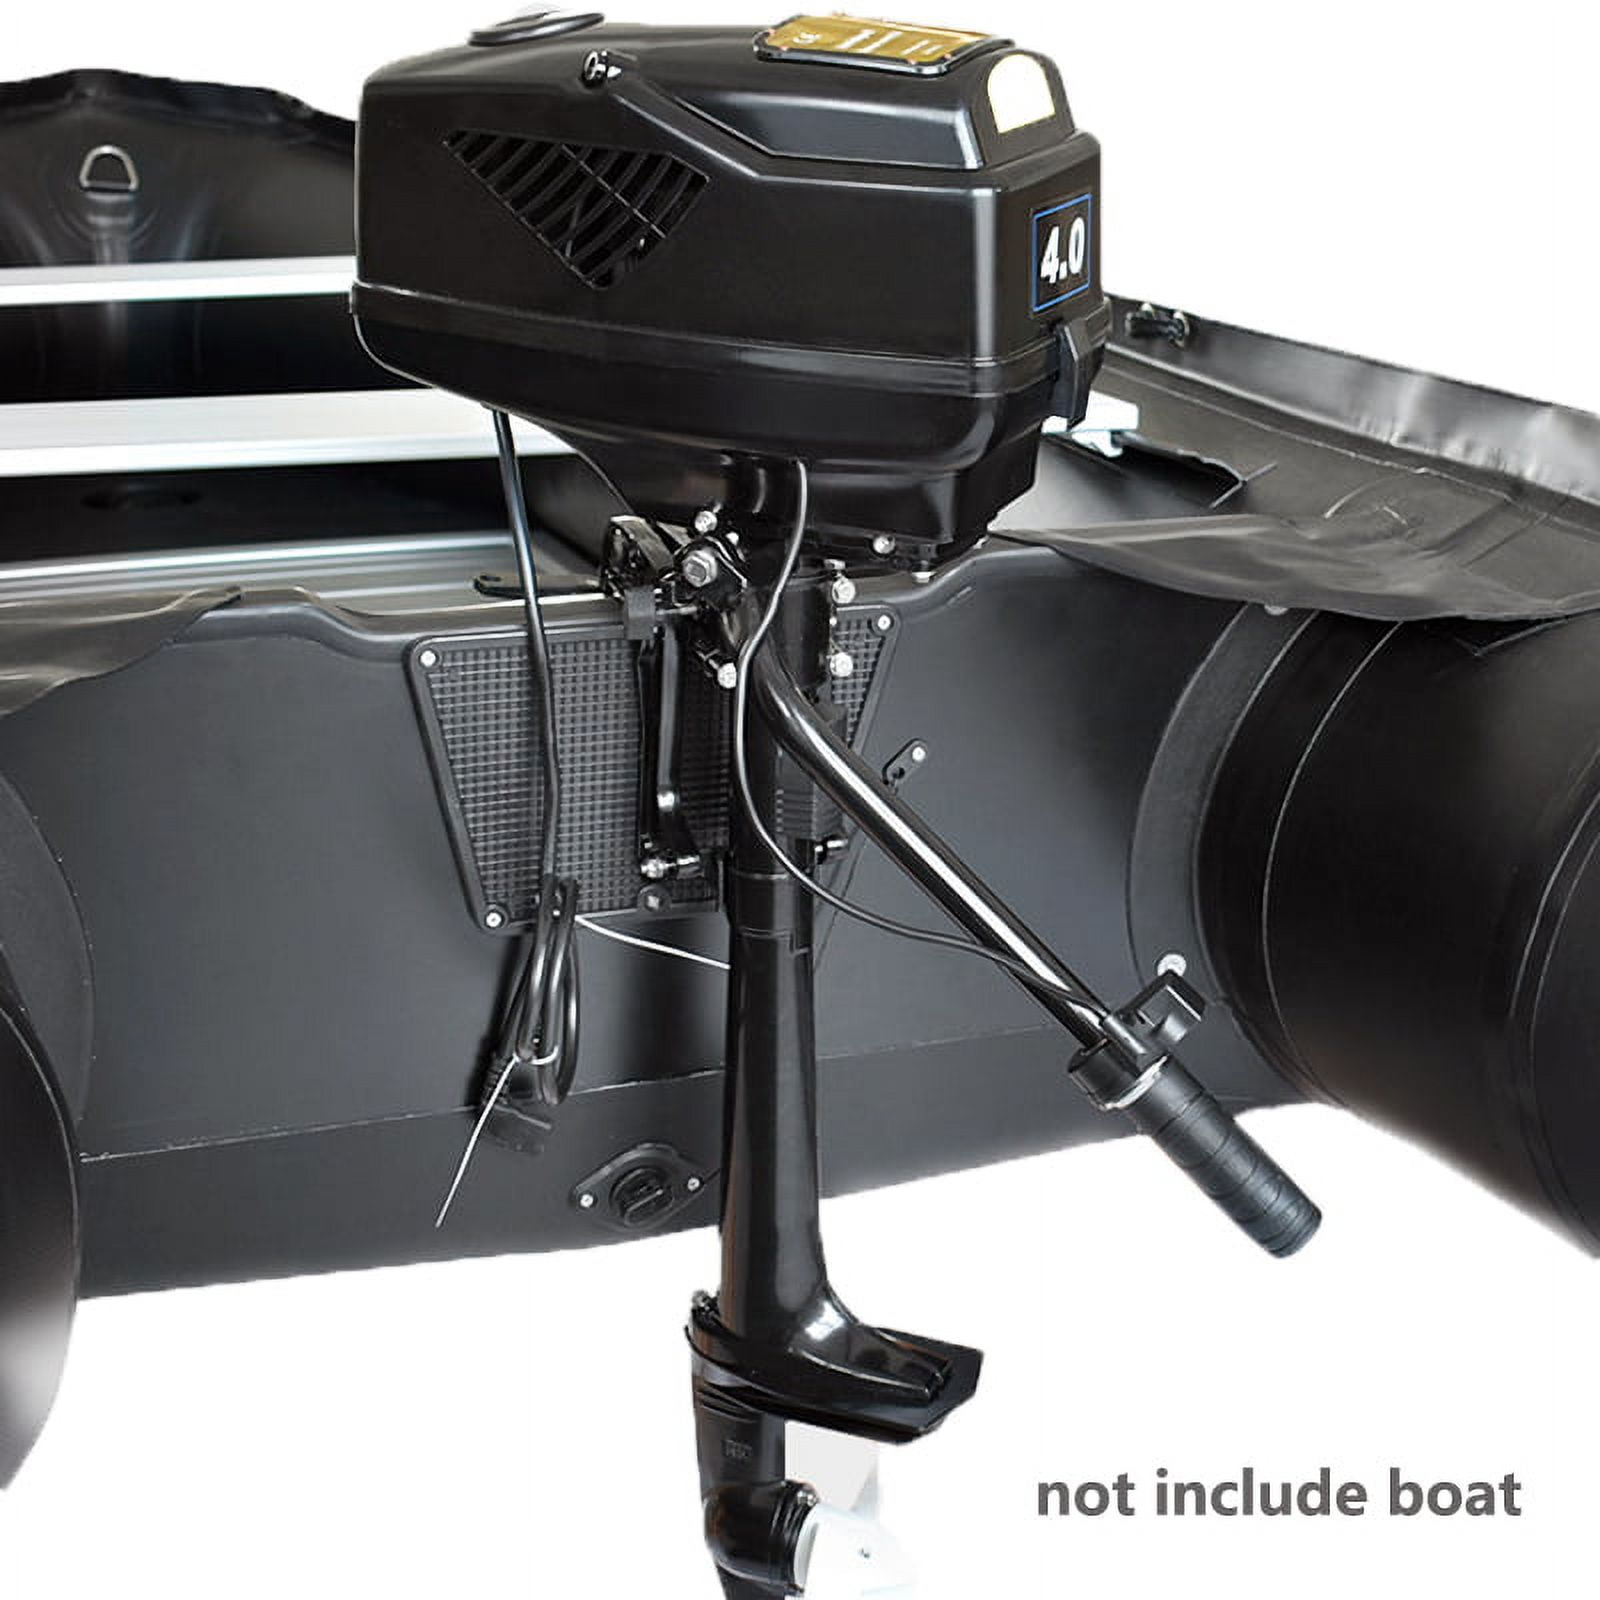 Intbuying 4HP 48V Electric Outboard Trolling Motor Fishing Boat